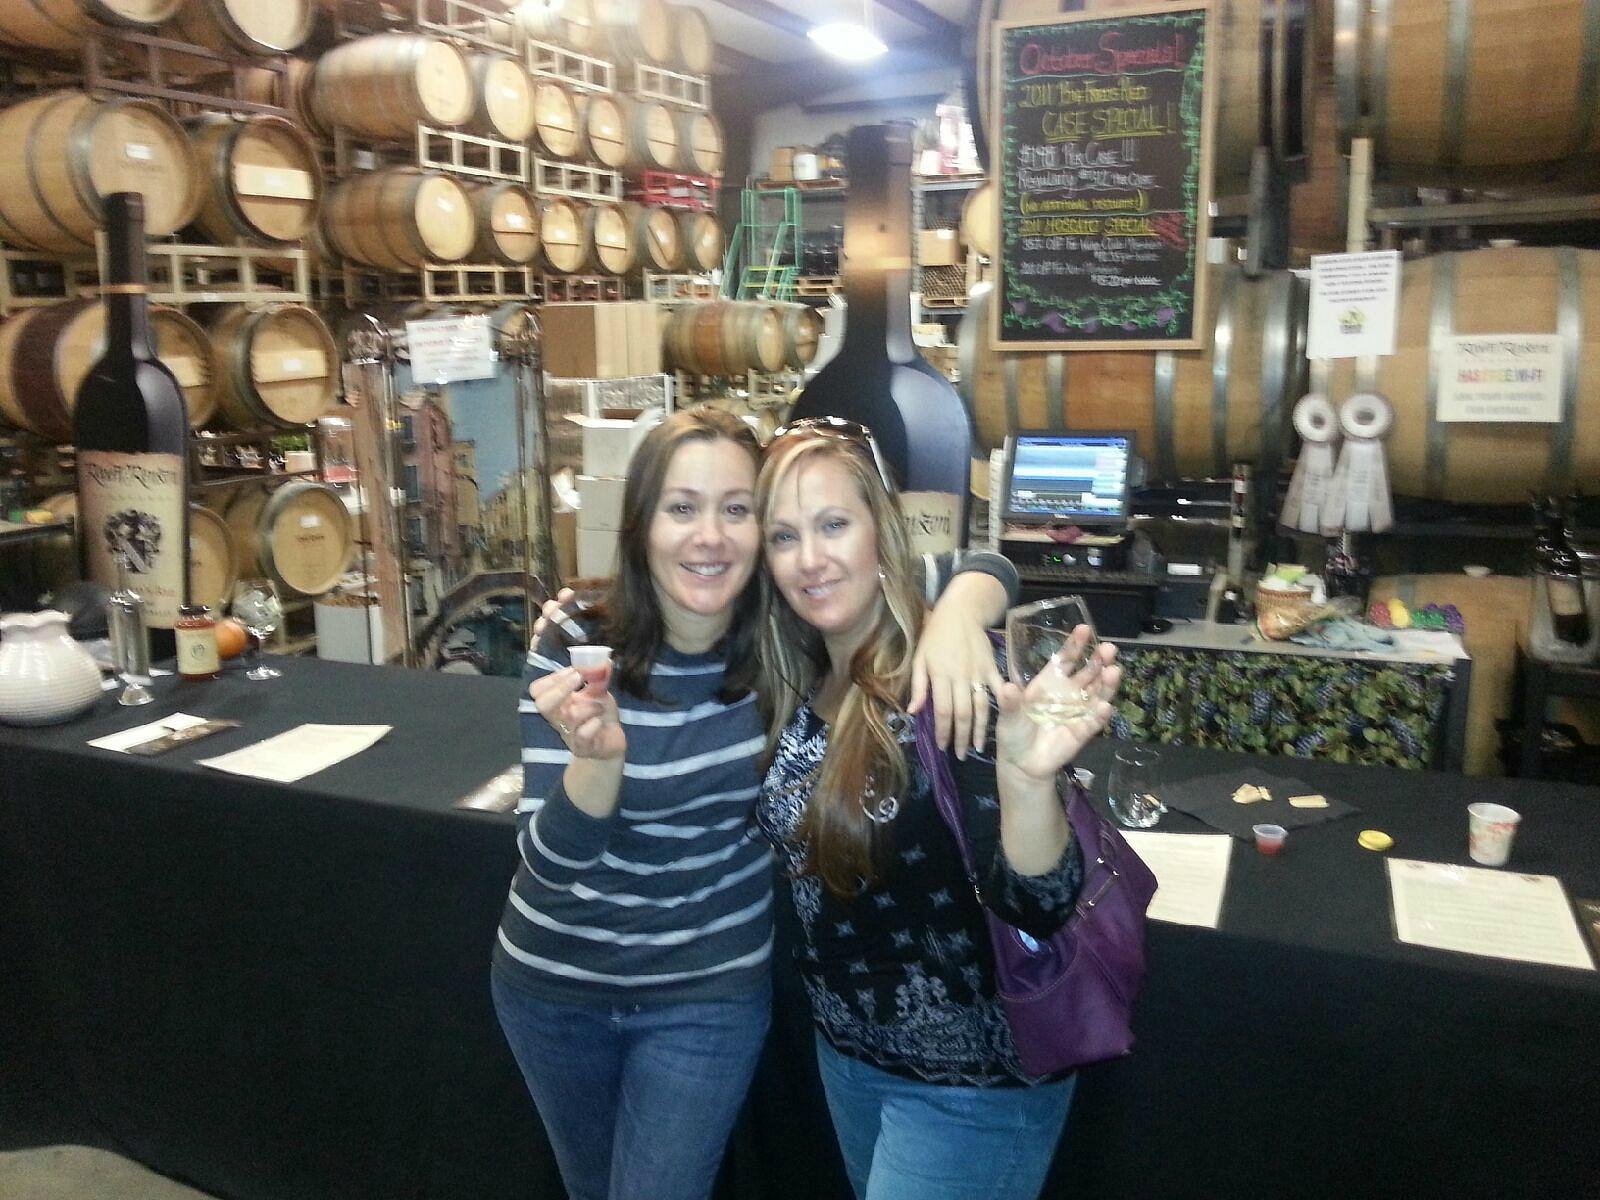 rock and roll wine tour temecula